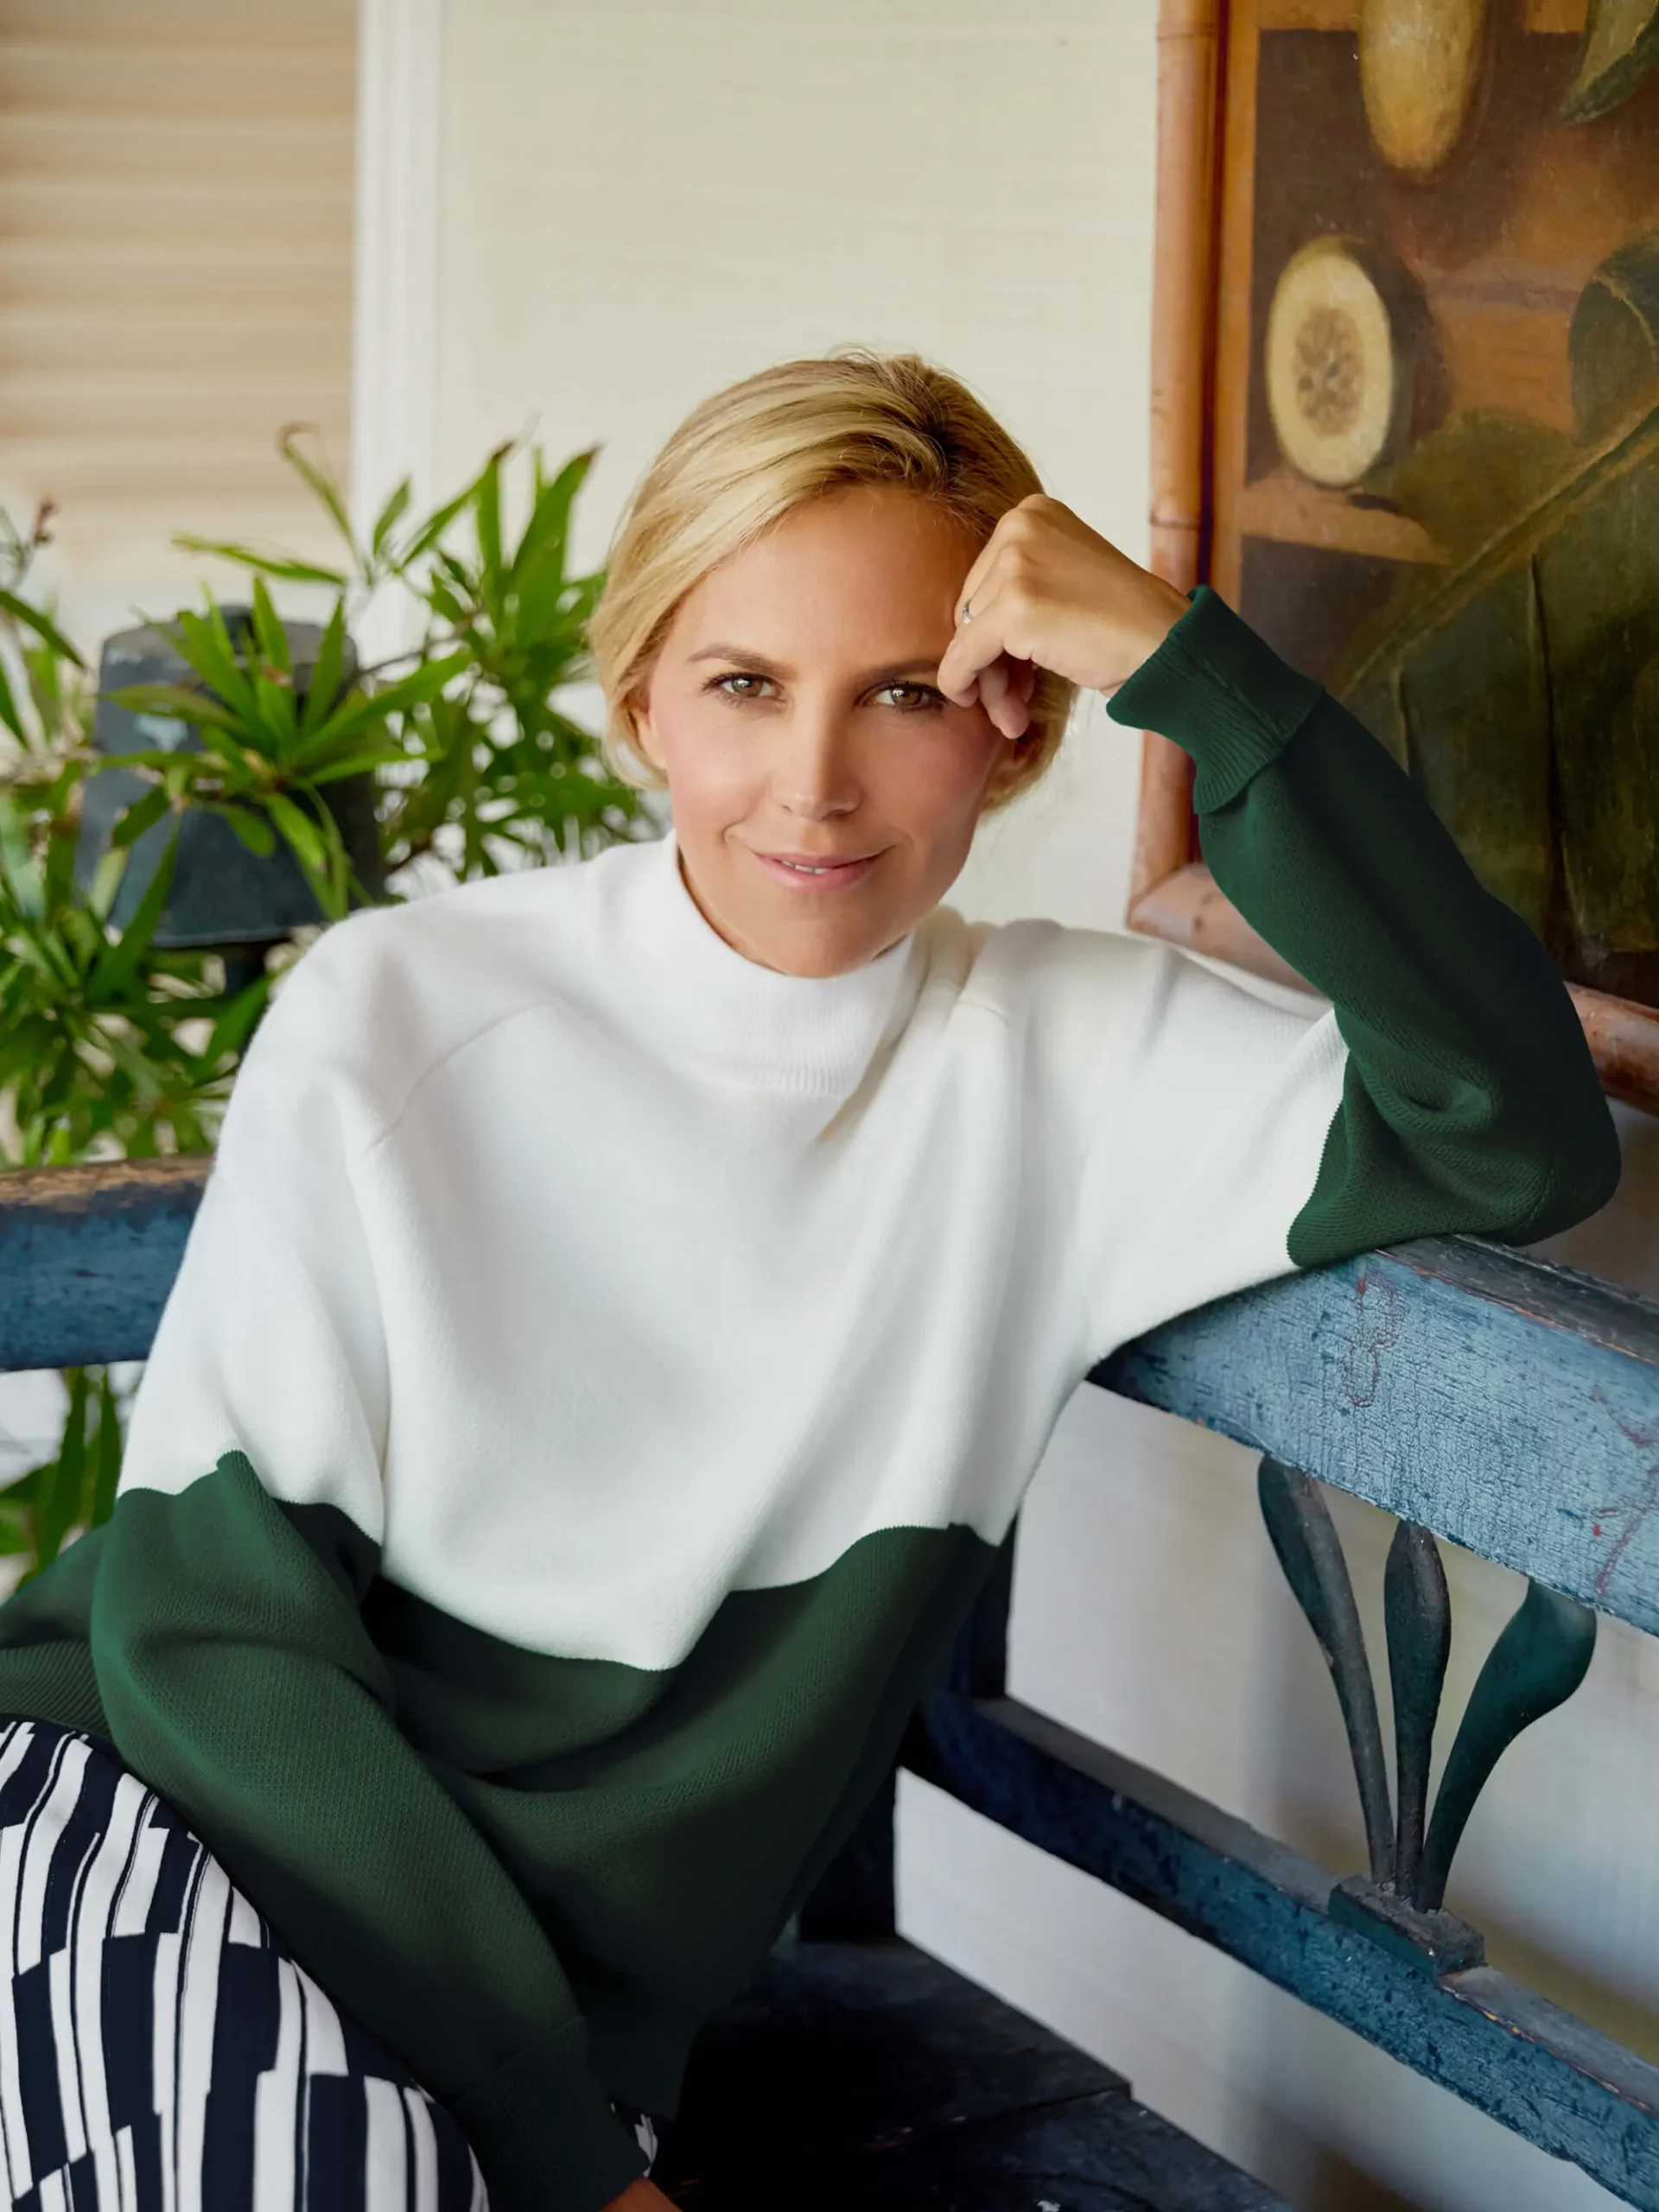 Everything About Tory Burch and Her Luxury Fashion Brand - The Teal Mango